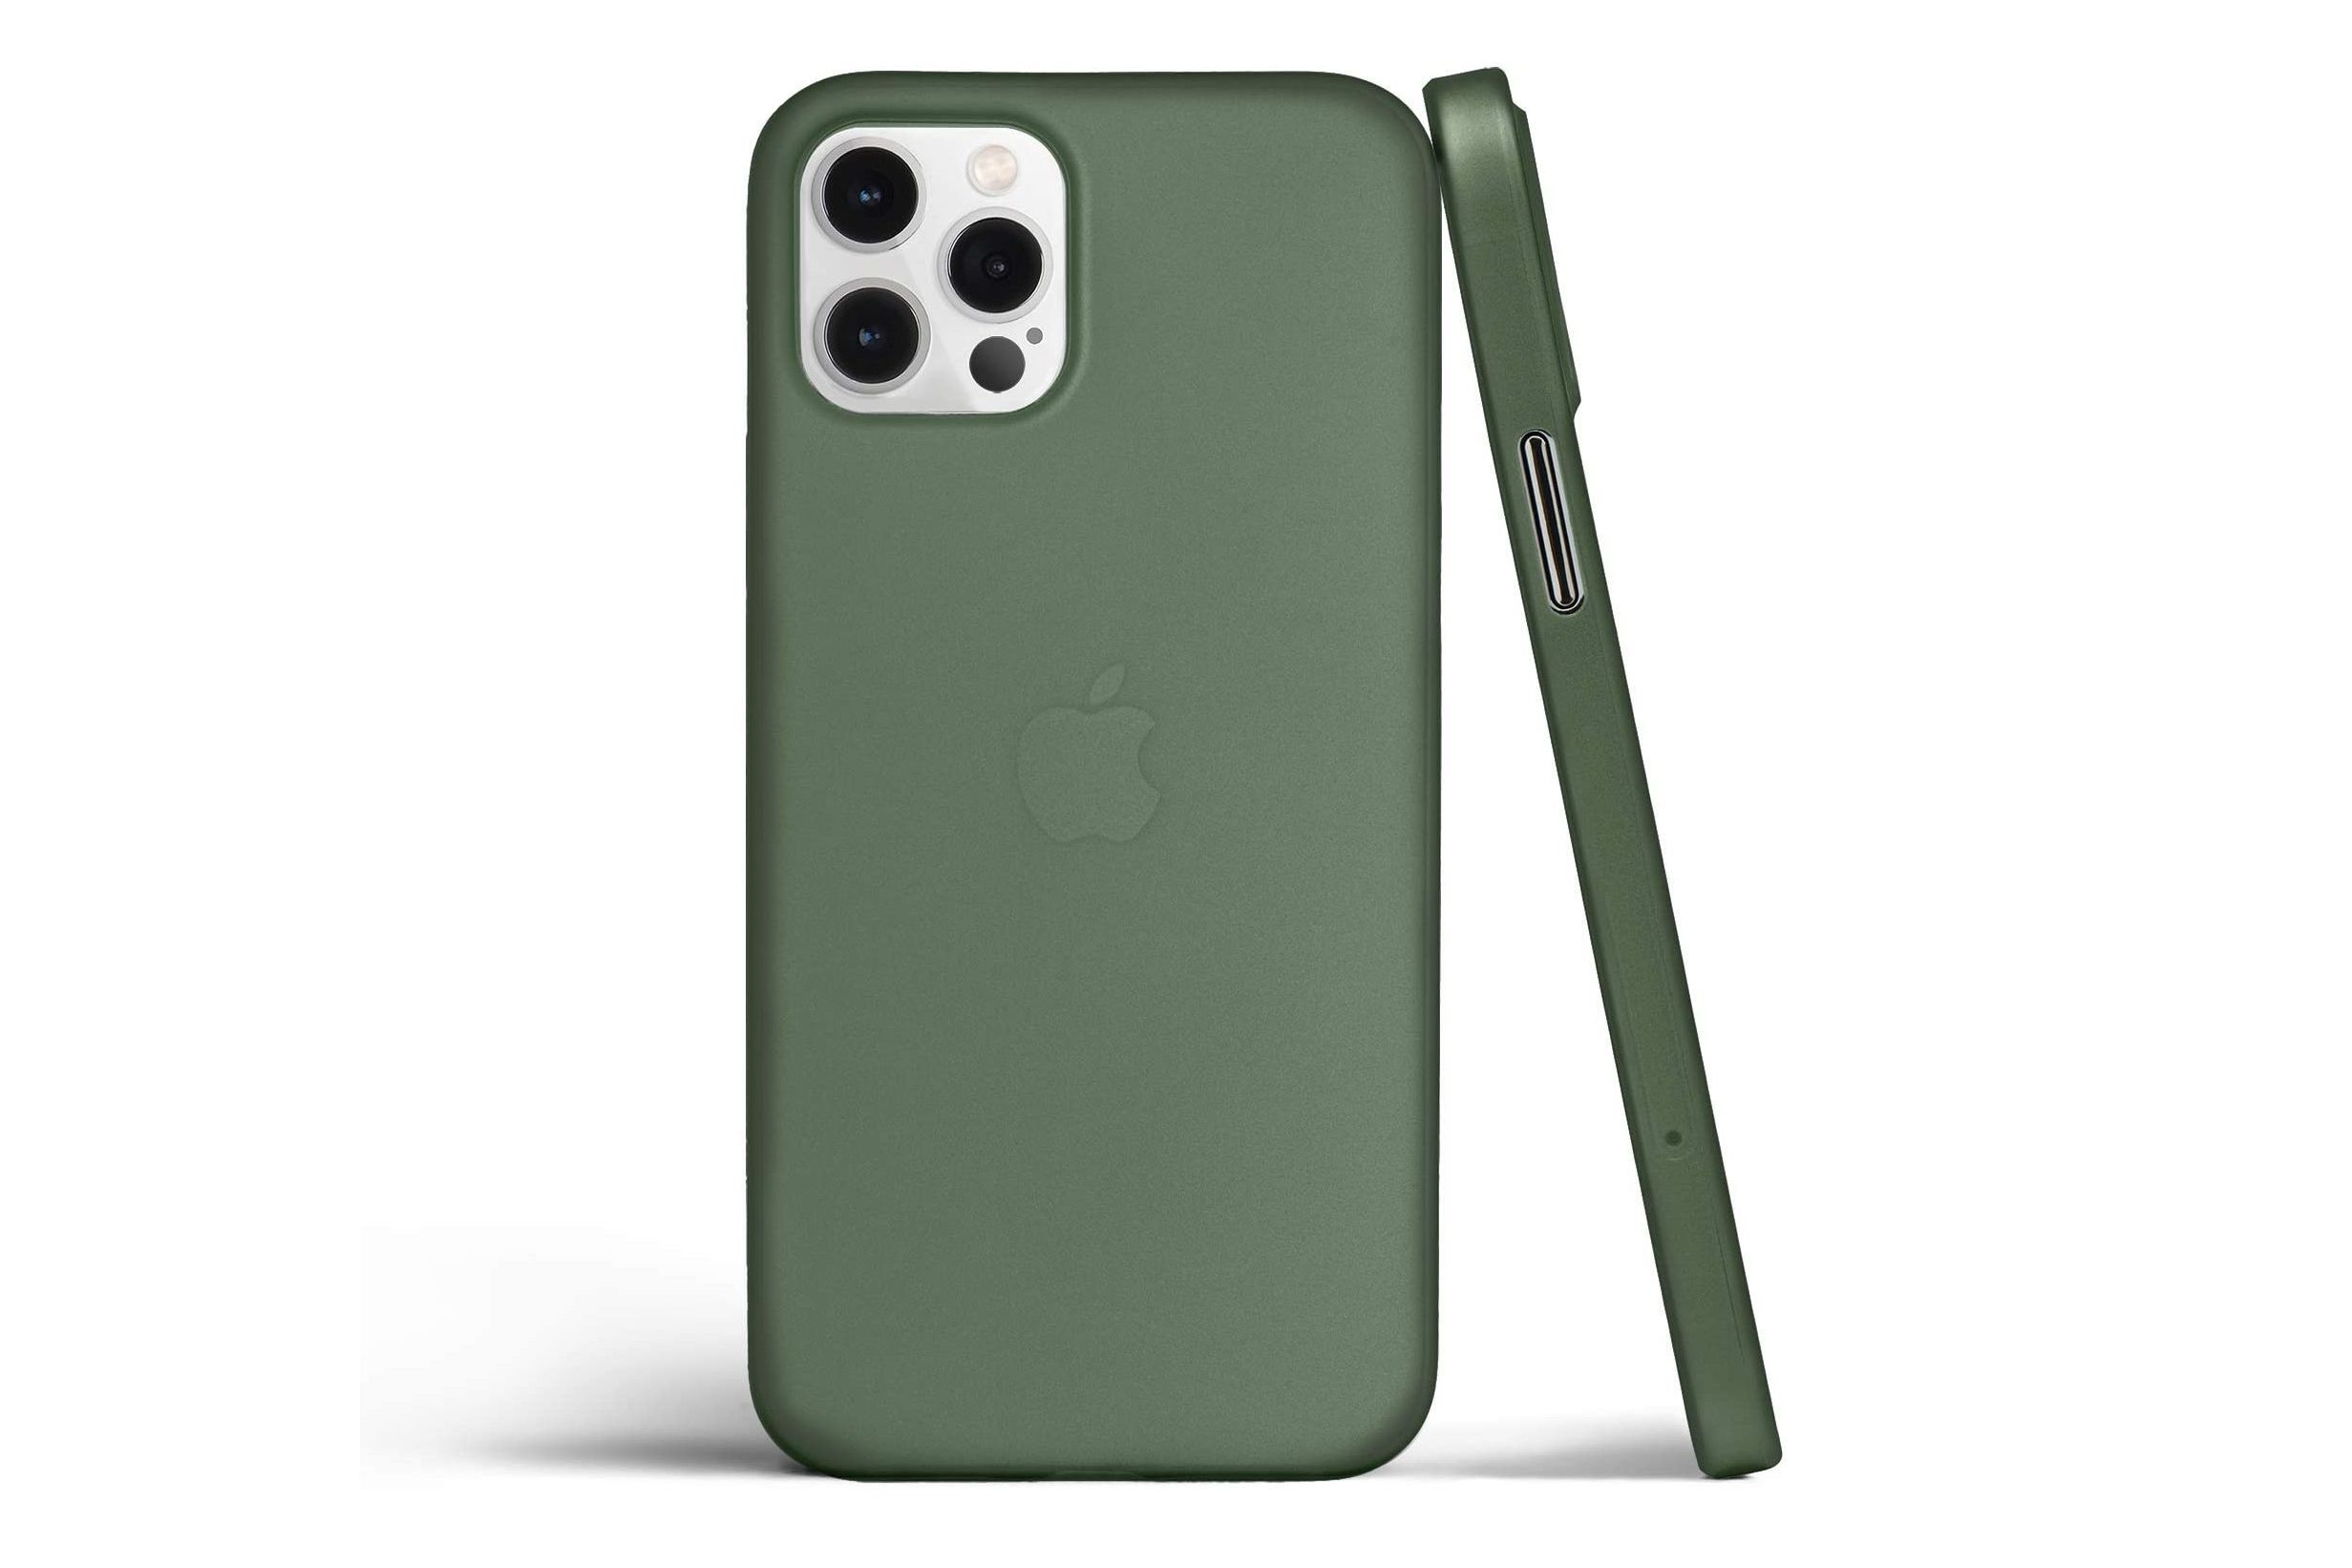 totallee Super Thin iPhone 12 case - The Best iPhone 12 and 12 Pro cases - our handpicked selection